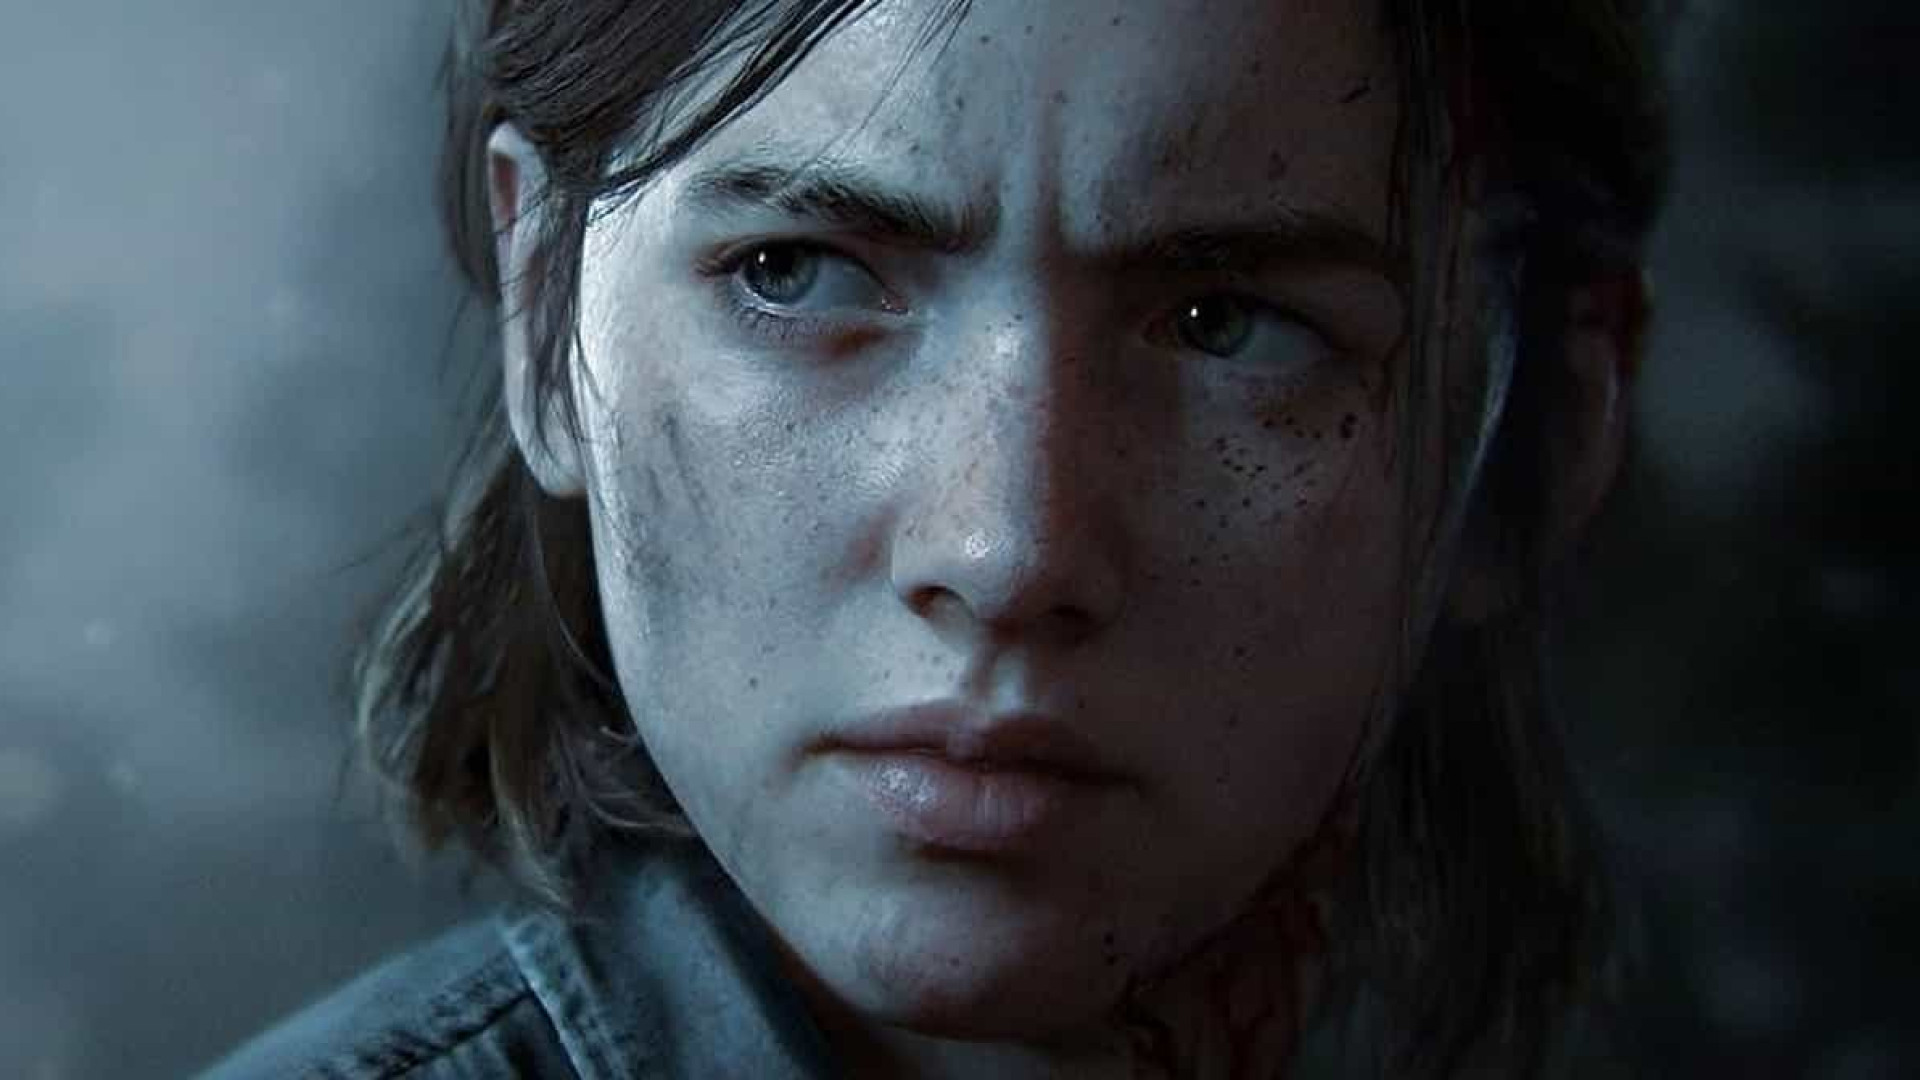 Game 'The Last of Us Part 2' insere personagens lésbicas e trans